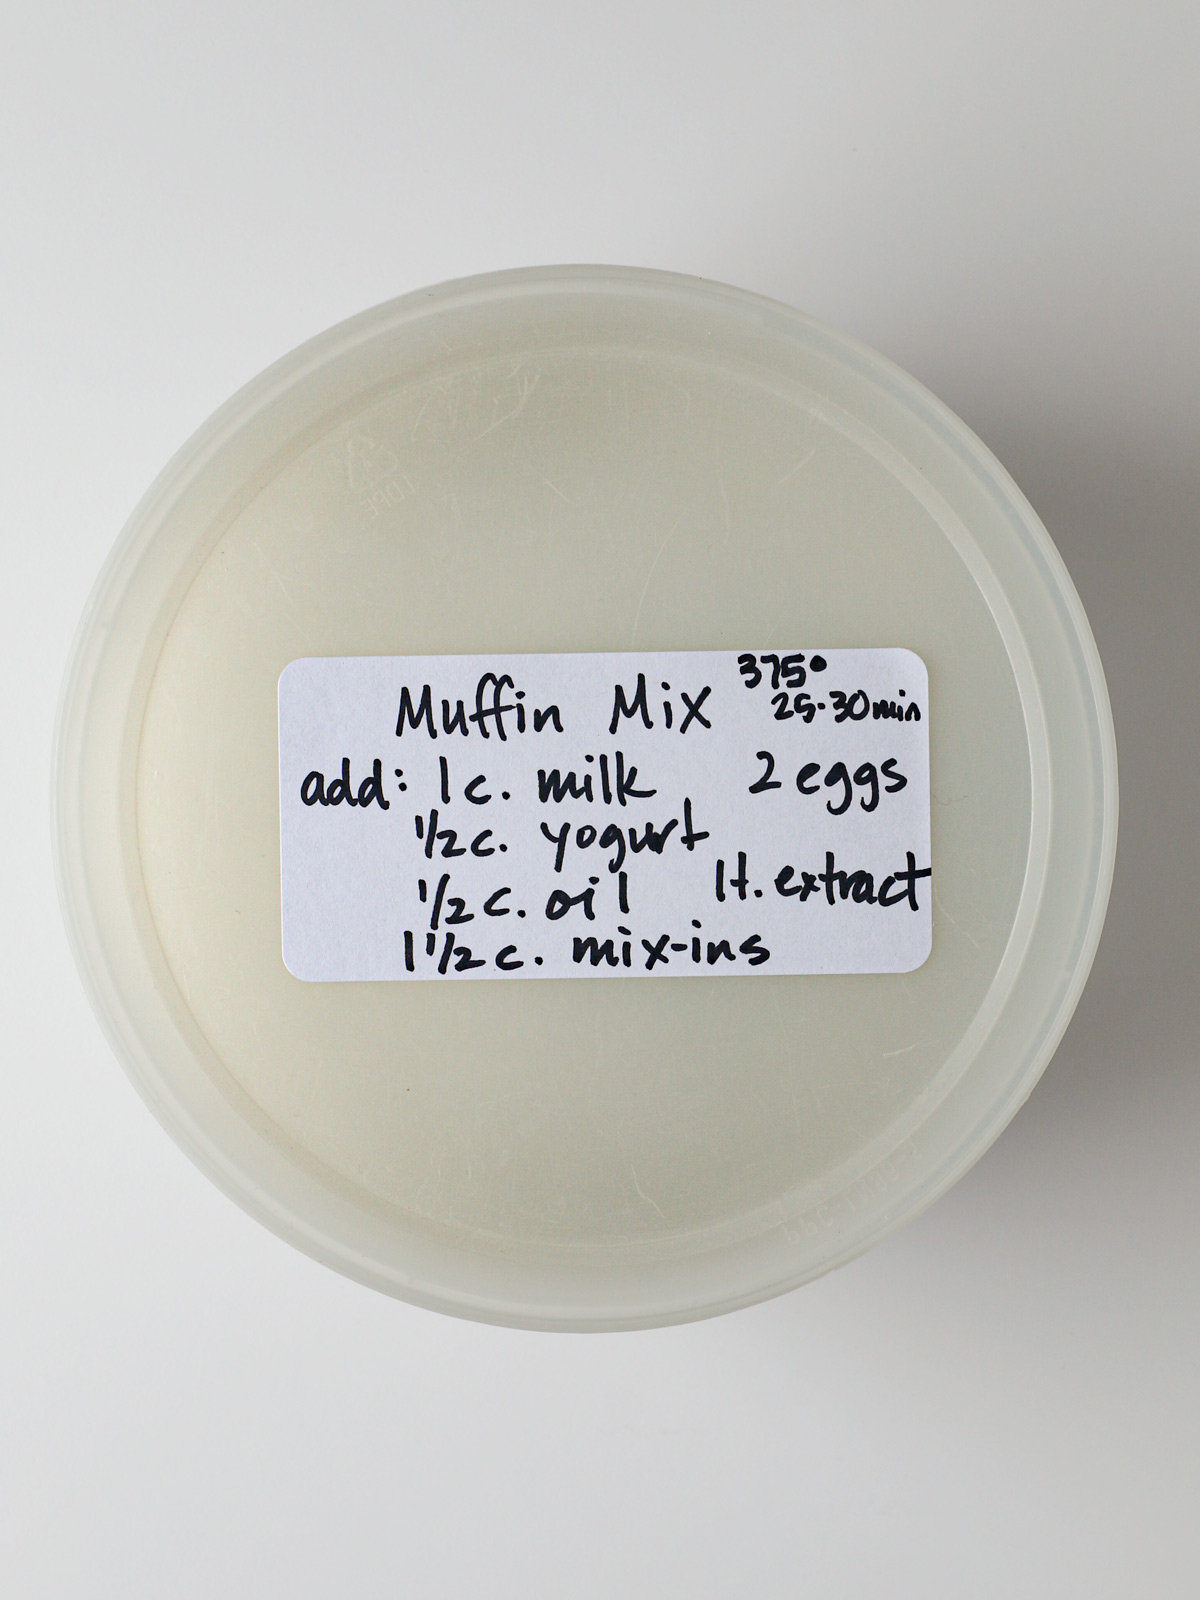 plastic tub holding homemade muffin mix with a handwritten label.